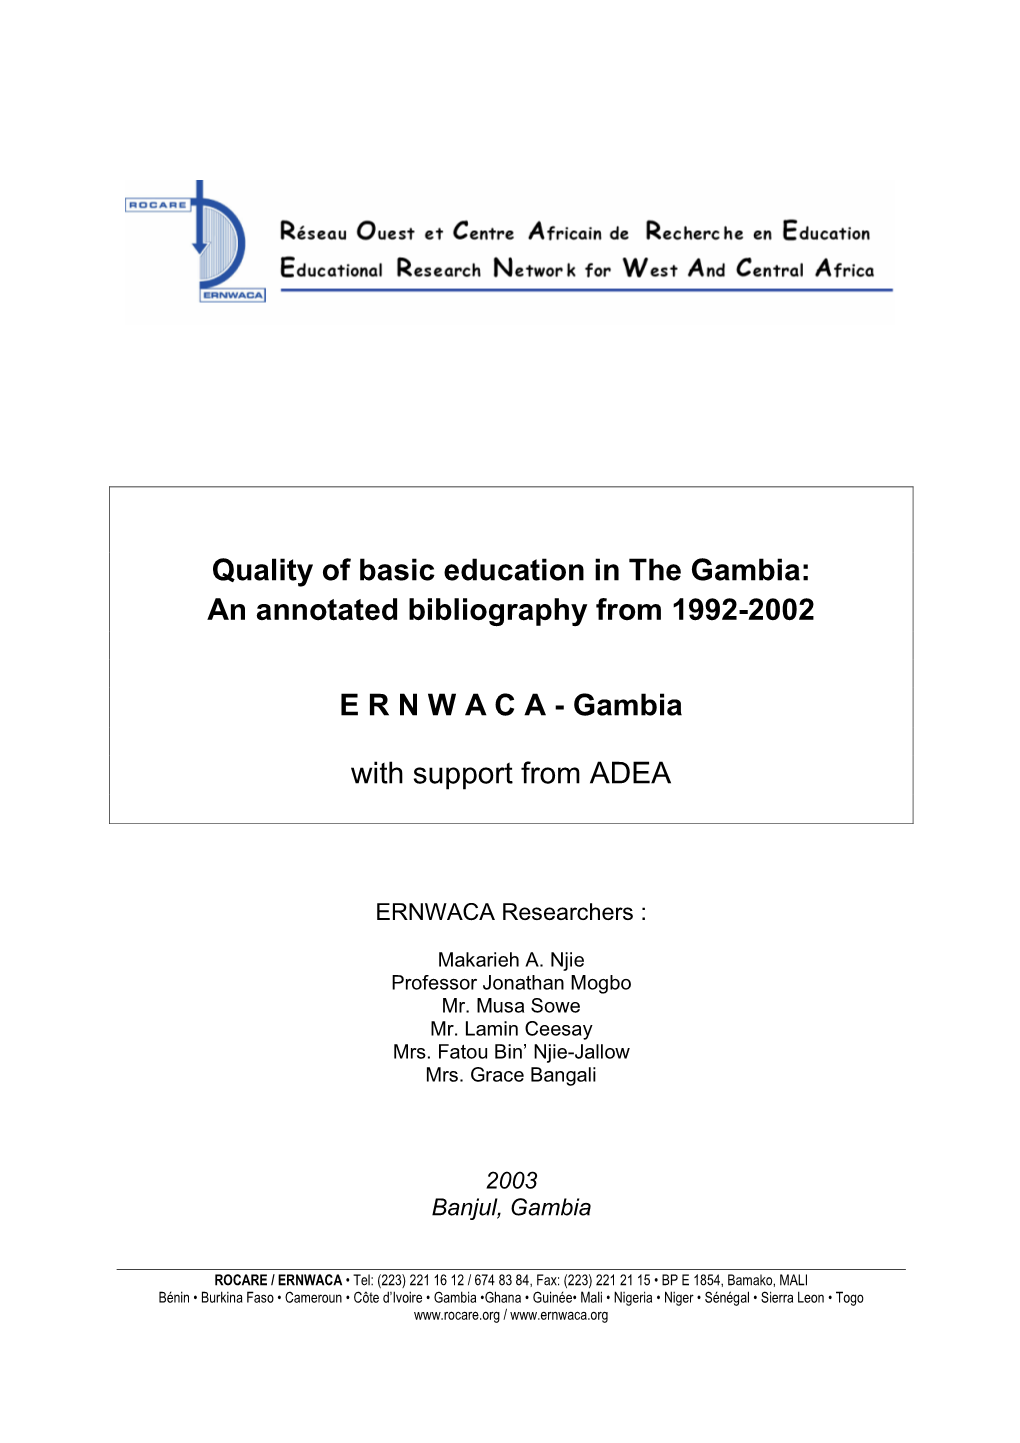 Quality of Basic Education in the Gambia: an Annotated Bibliography from 1992-2002